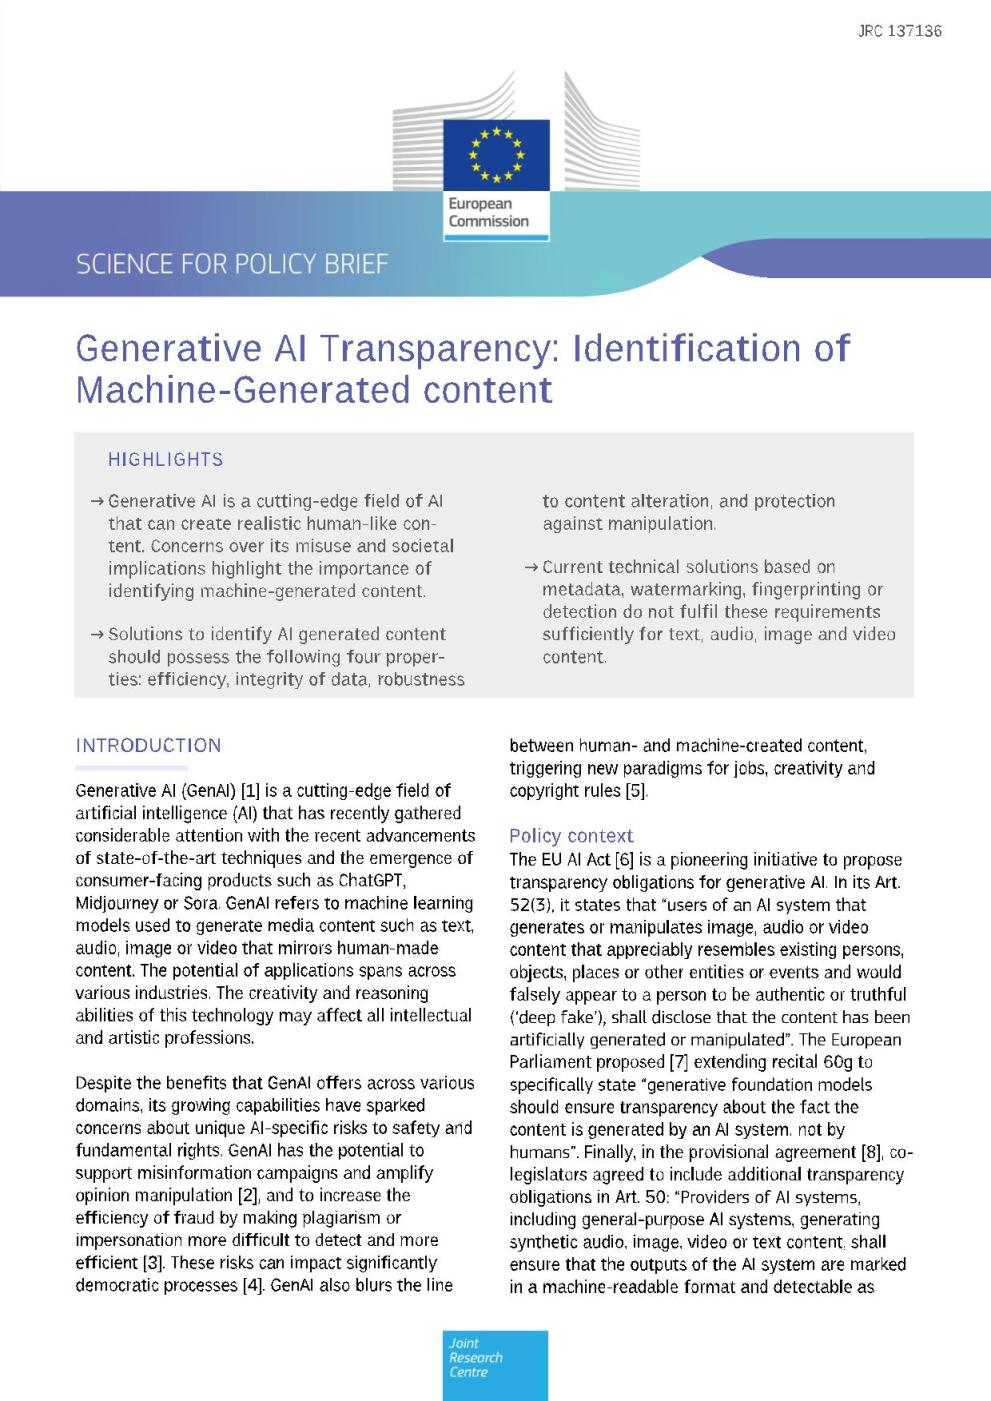 Generative AI Transparency: Identification of Machine-Generated content